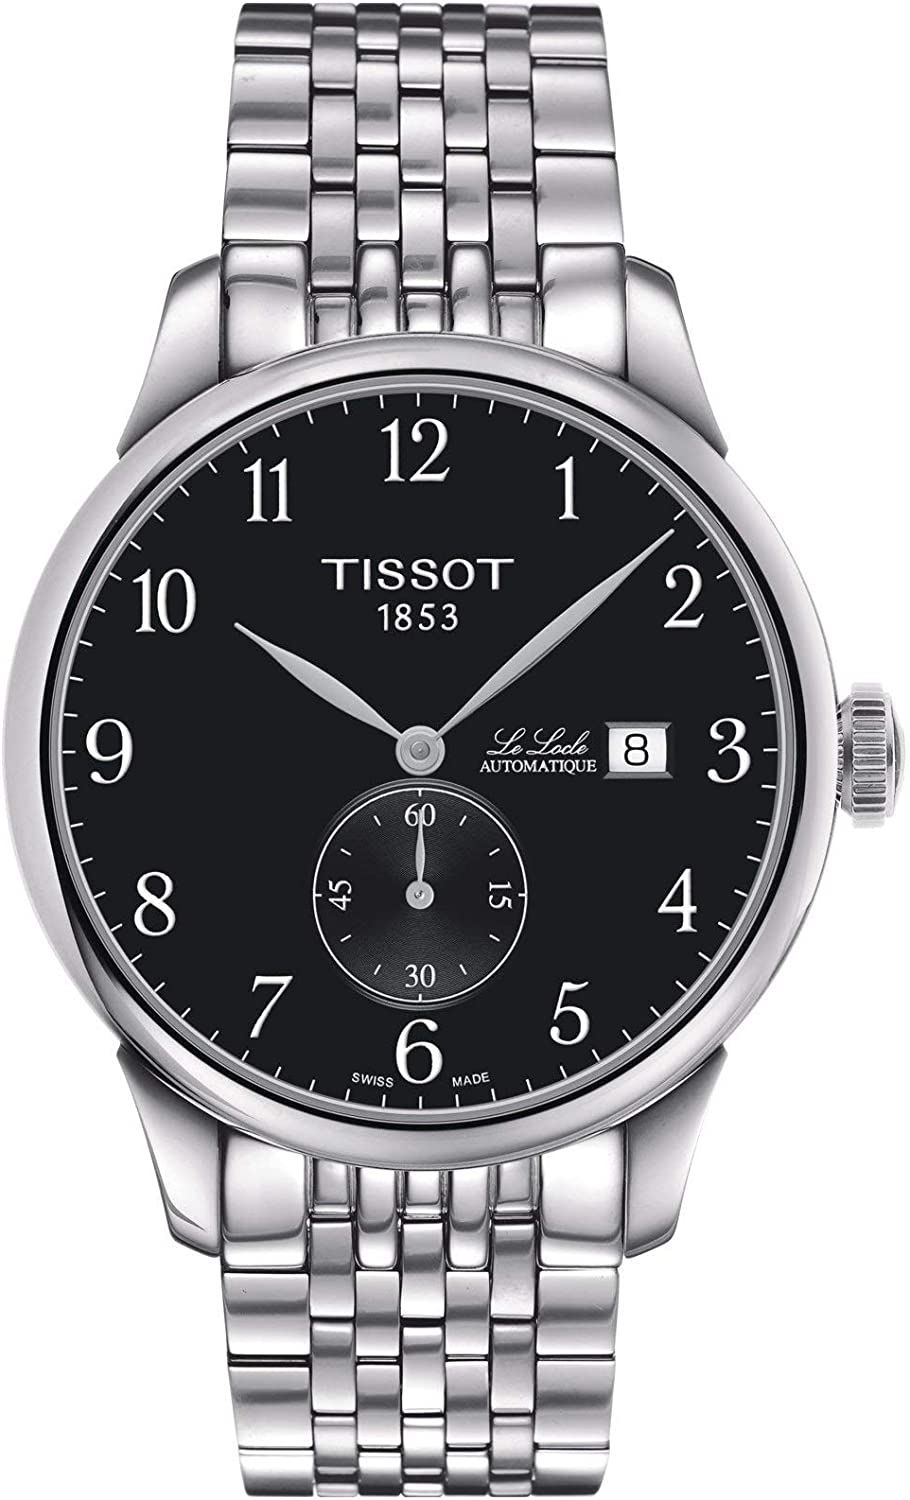 Tissot Men's Le Locle Swiss Automatic Watch with Stainless Steel Strap, Gray, 19 (Model: T0064281105200)